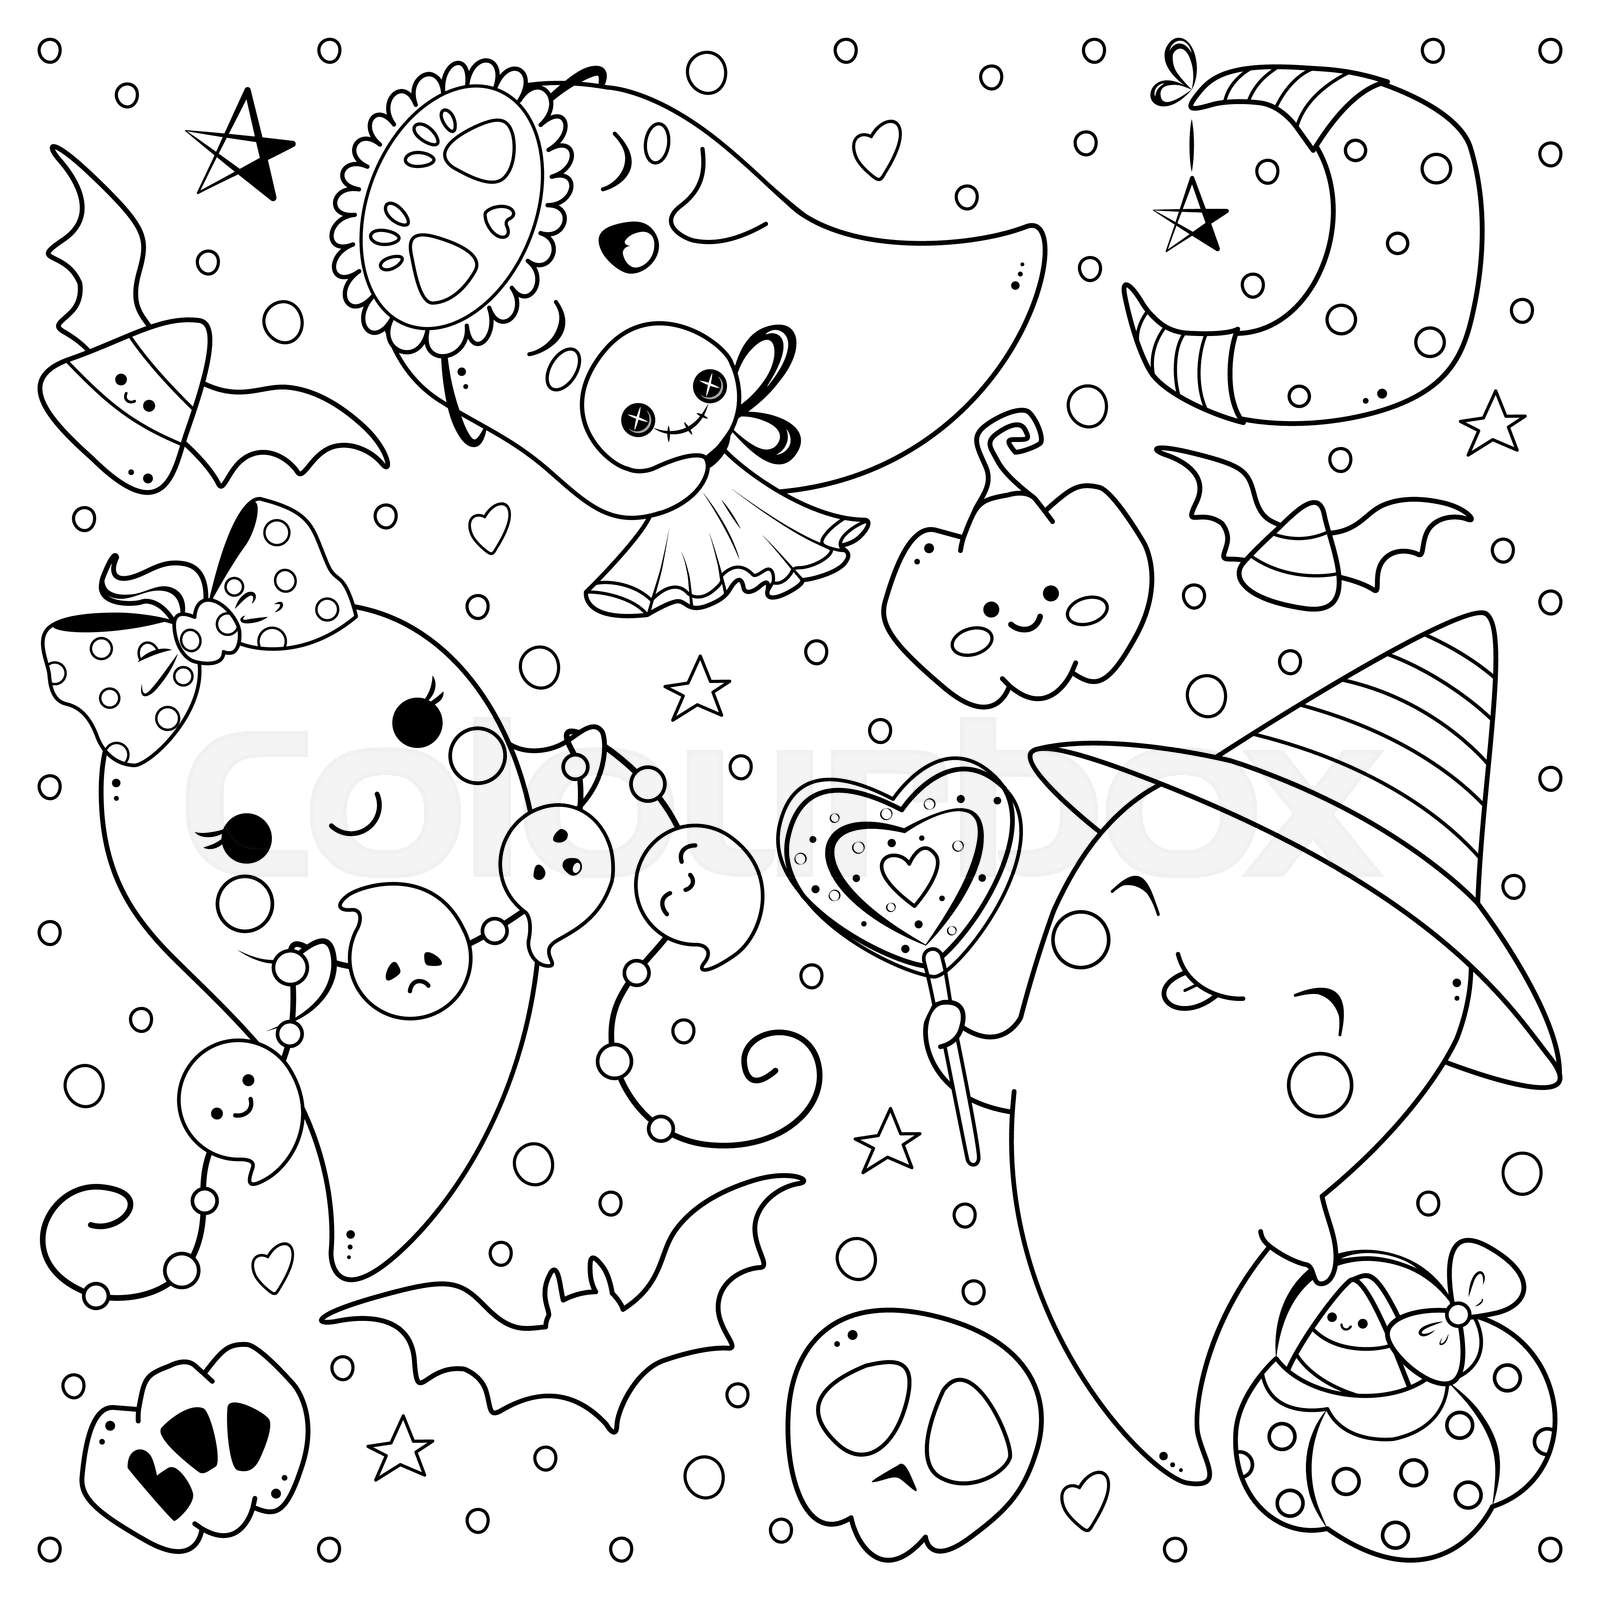 Kawaii ghosts for halloween coloring page outline cartoon vector illustration stock vector